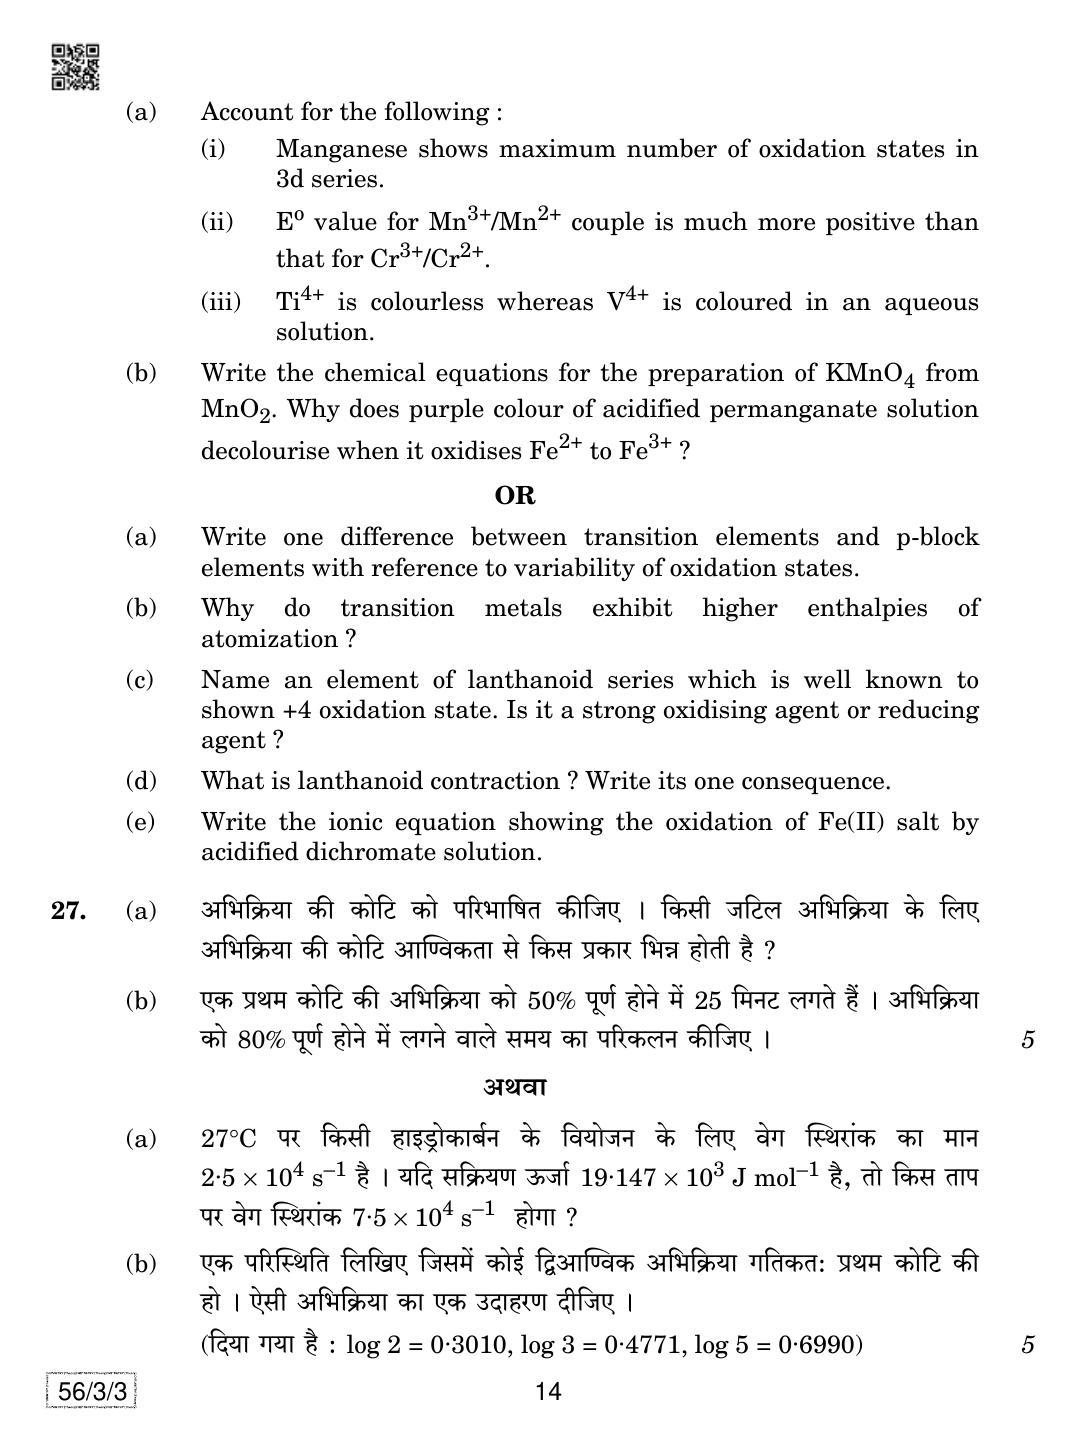 CBSE Class 12 56-3-3 Chemistry 2019 Question Paper - Page 14